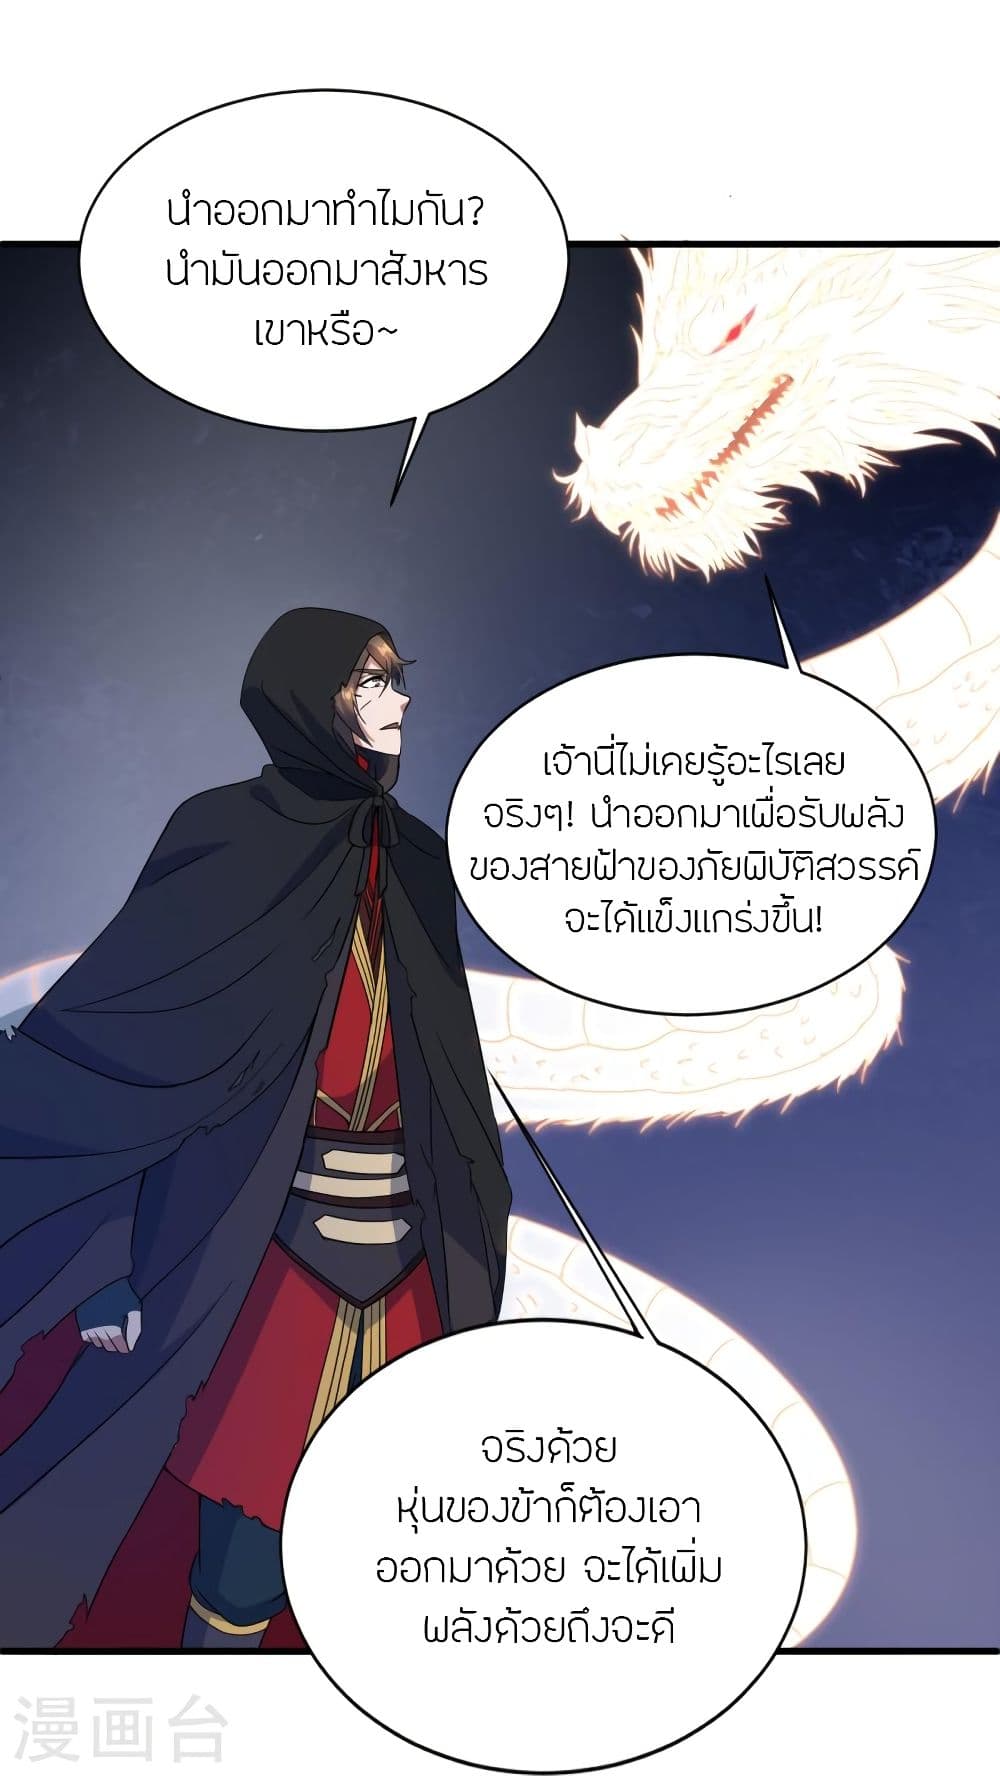 Banished Disciple's Counterattack เธเธฑเธเธฃเธเธฃเธฃเธ”เธดเน€เธเธตเธขเธเธขเธธเธ—เธ 304 (68)